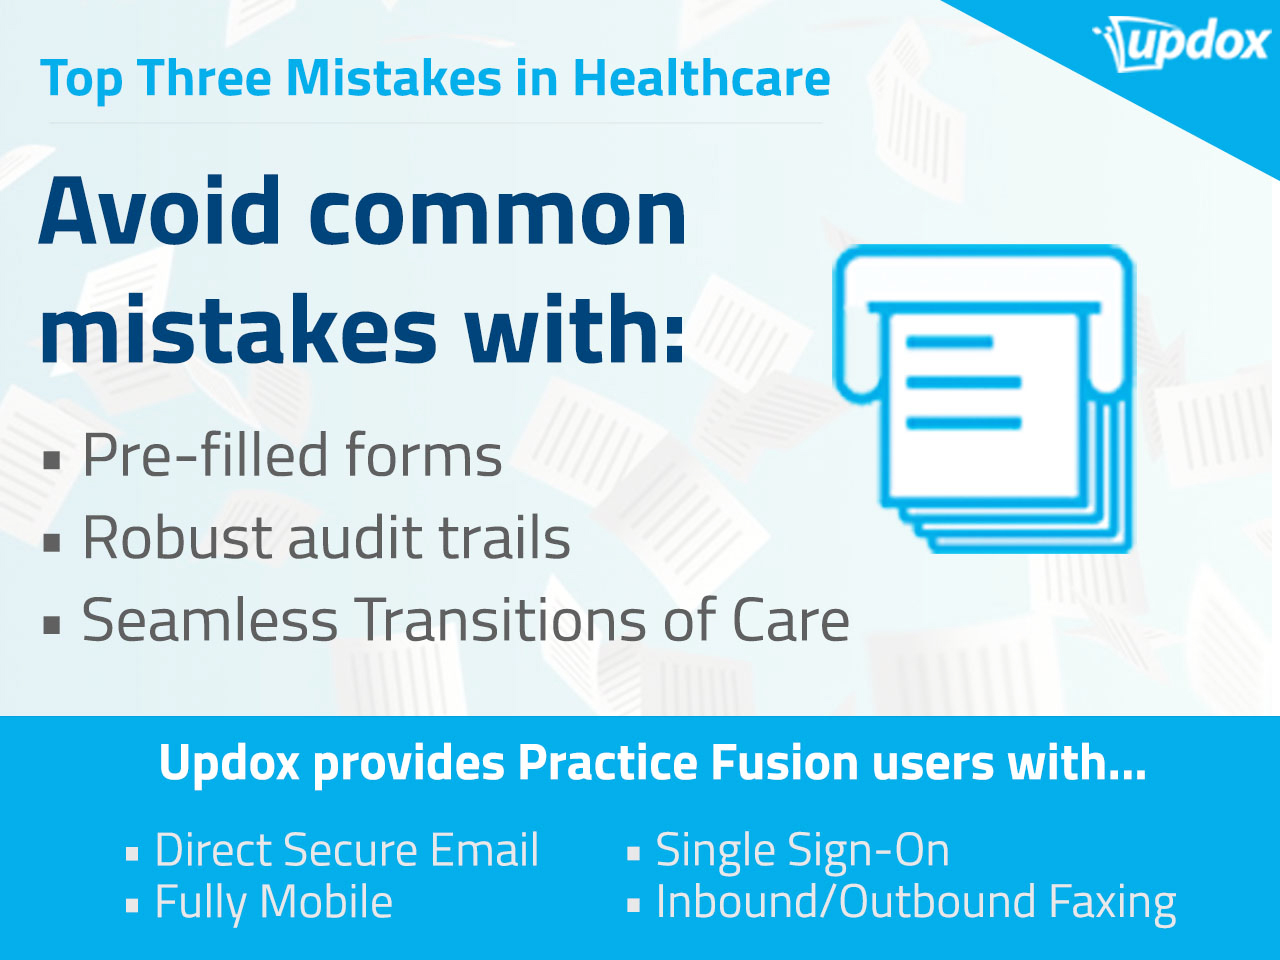 Avoid common mistakes with: Pre-filled forms, Robust audit trails, Seamless Transitions of Care